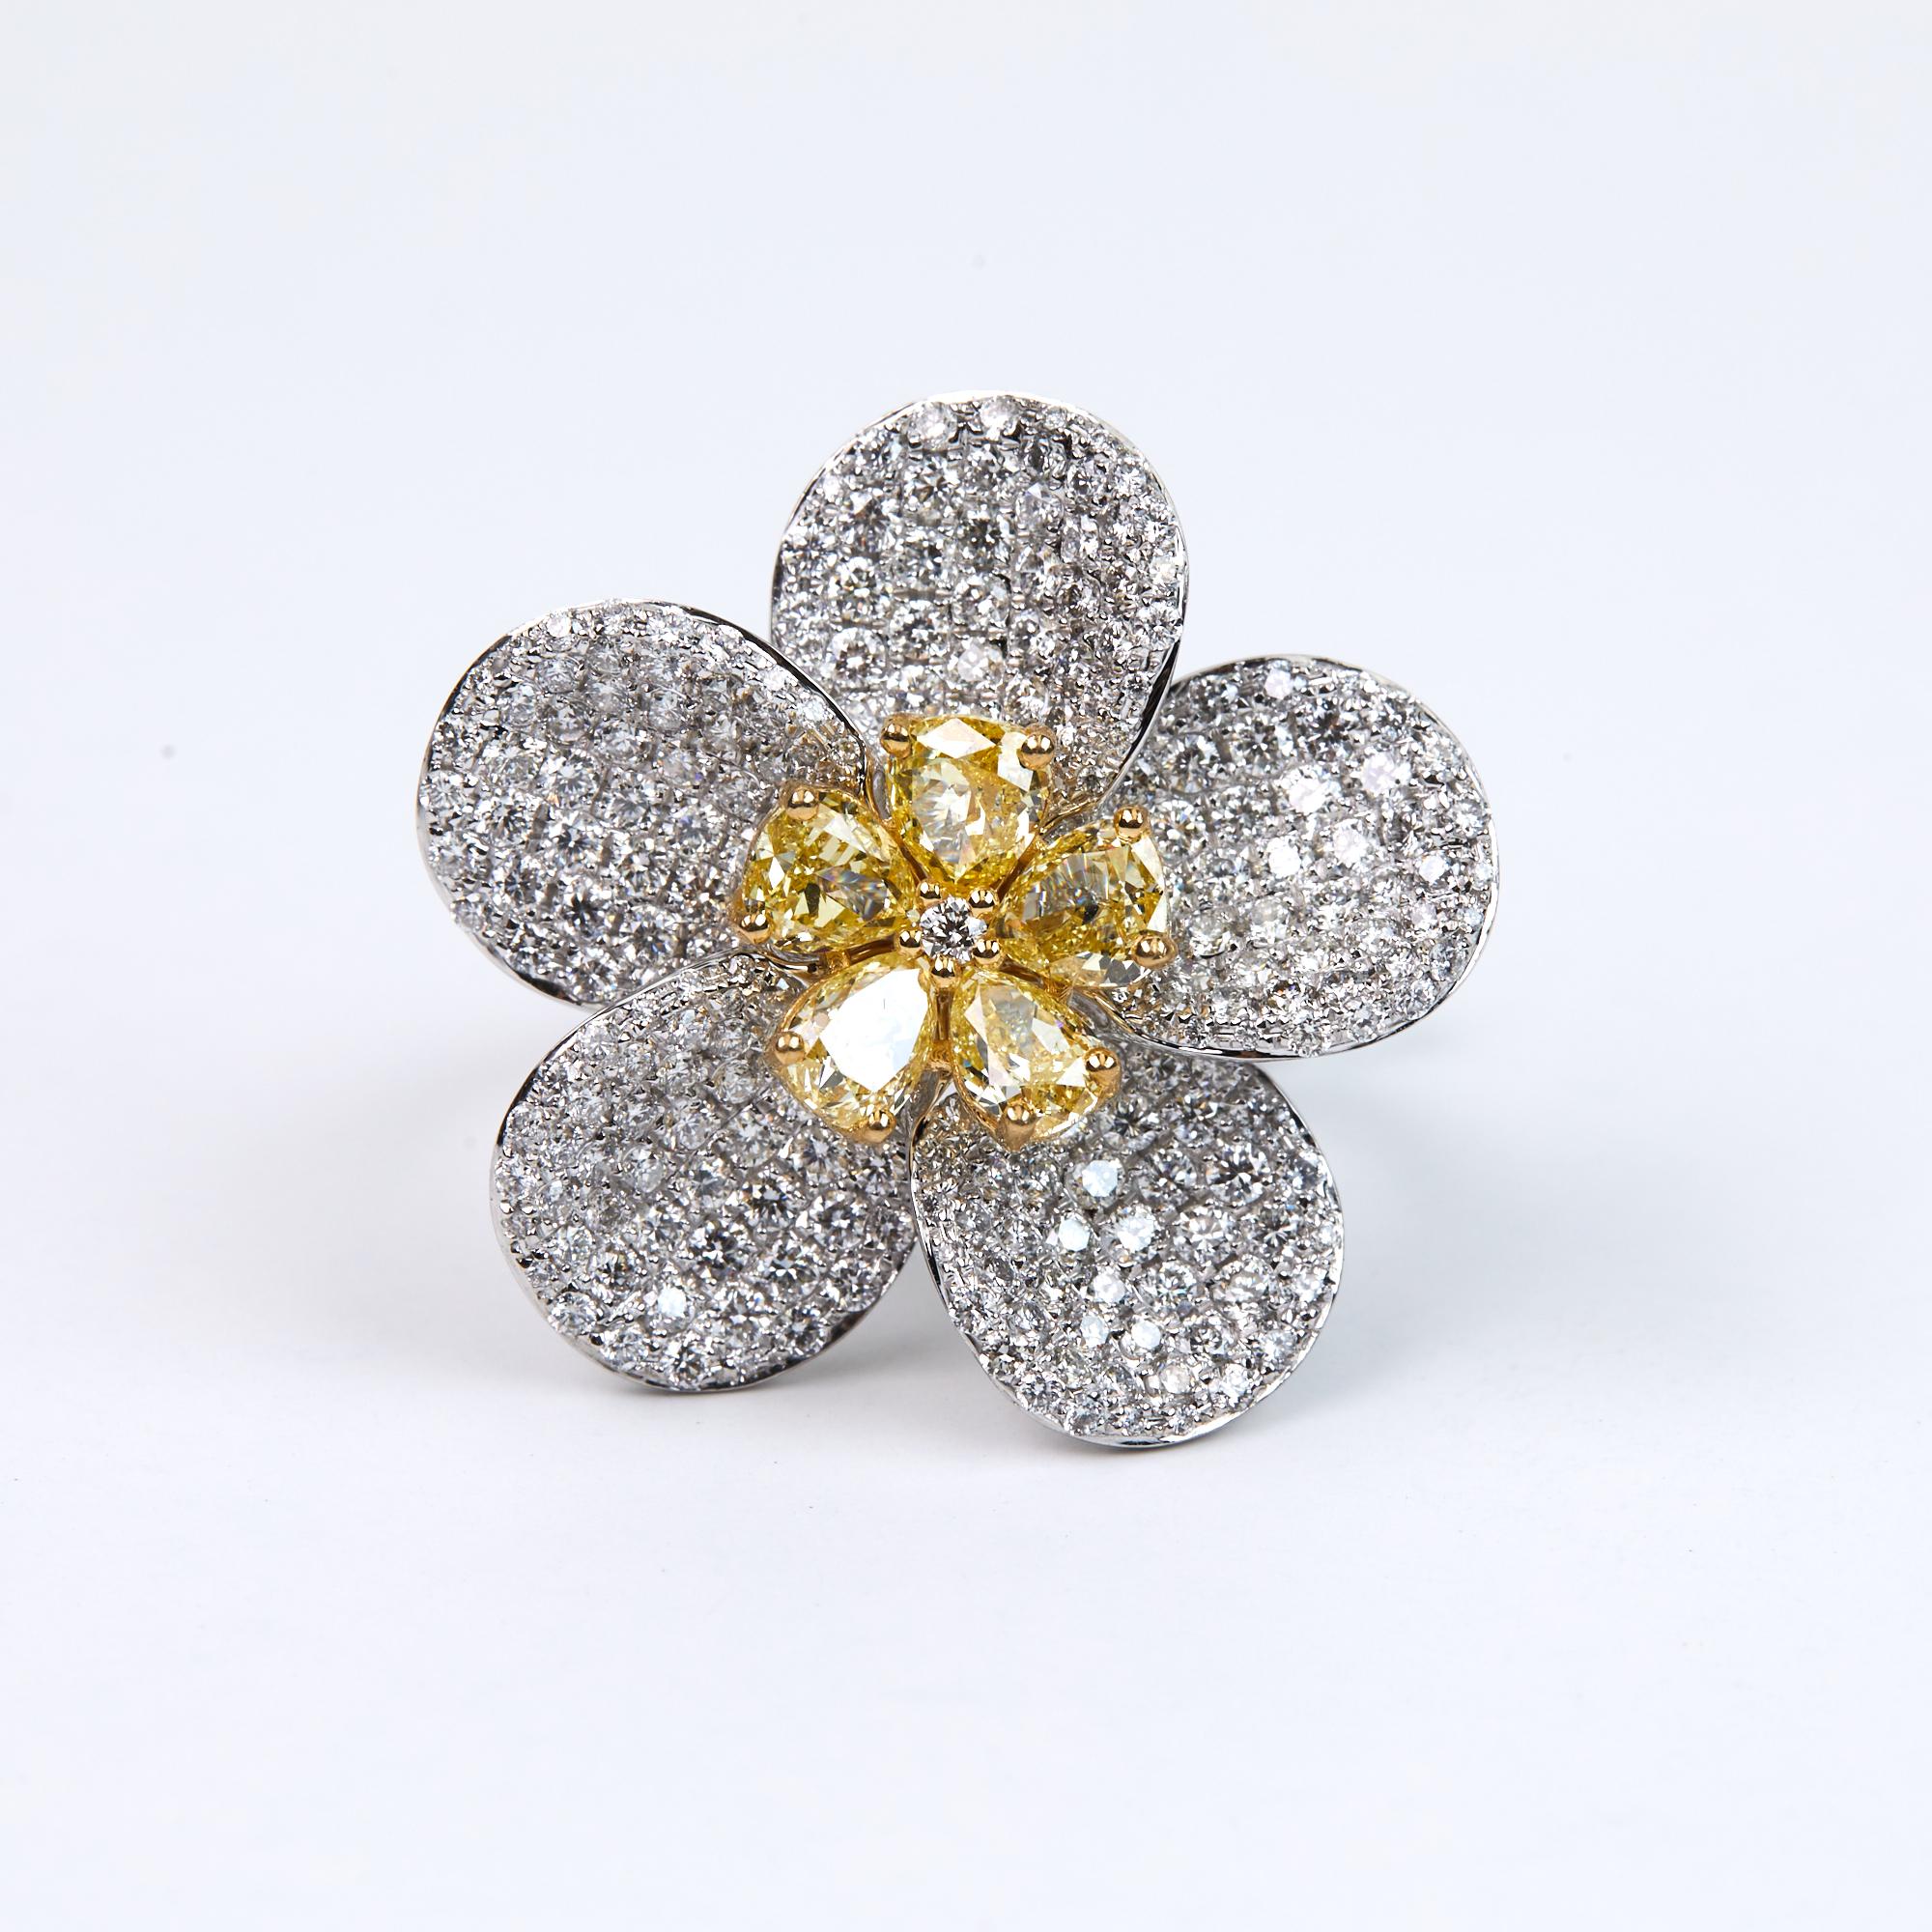 4.77 Carats Diamond Floral Fashion Cocktail Ring.  This one off a kind ring from Joseph Goott Jewelry Collection has 2.22 carats of Fancy Yellow Pear Shaped Diamonds prong set and 2.55 carats of White, Brilliant Round cut Diamonds Pavé set into 18